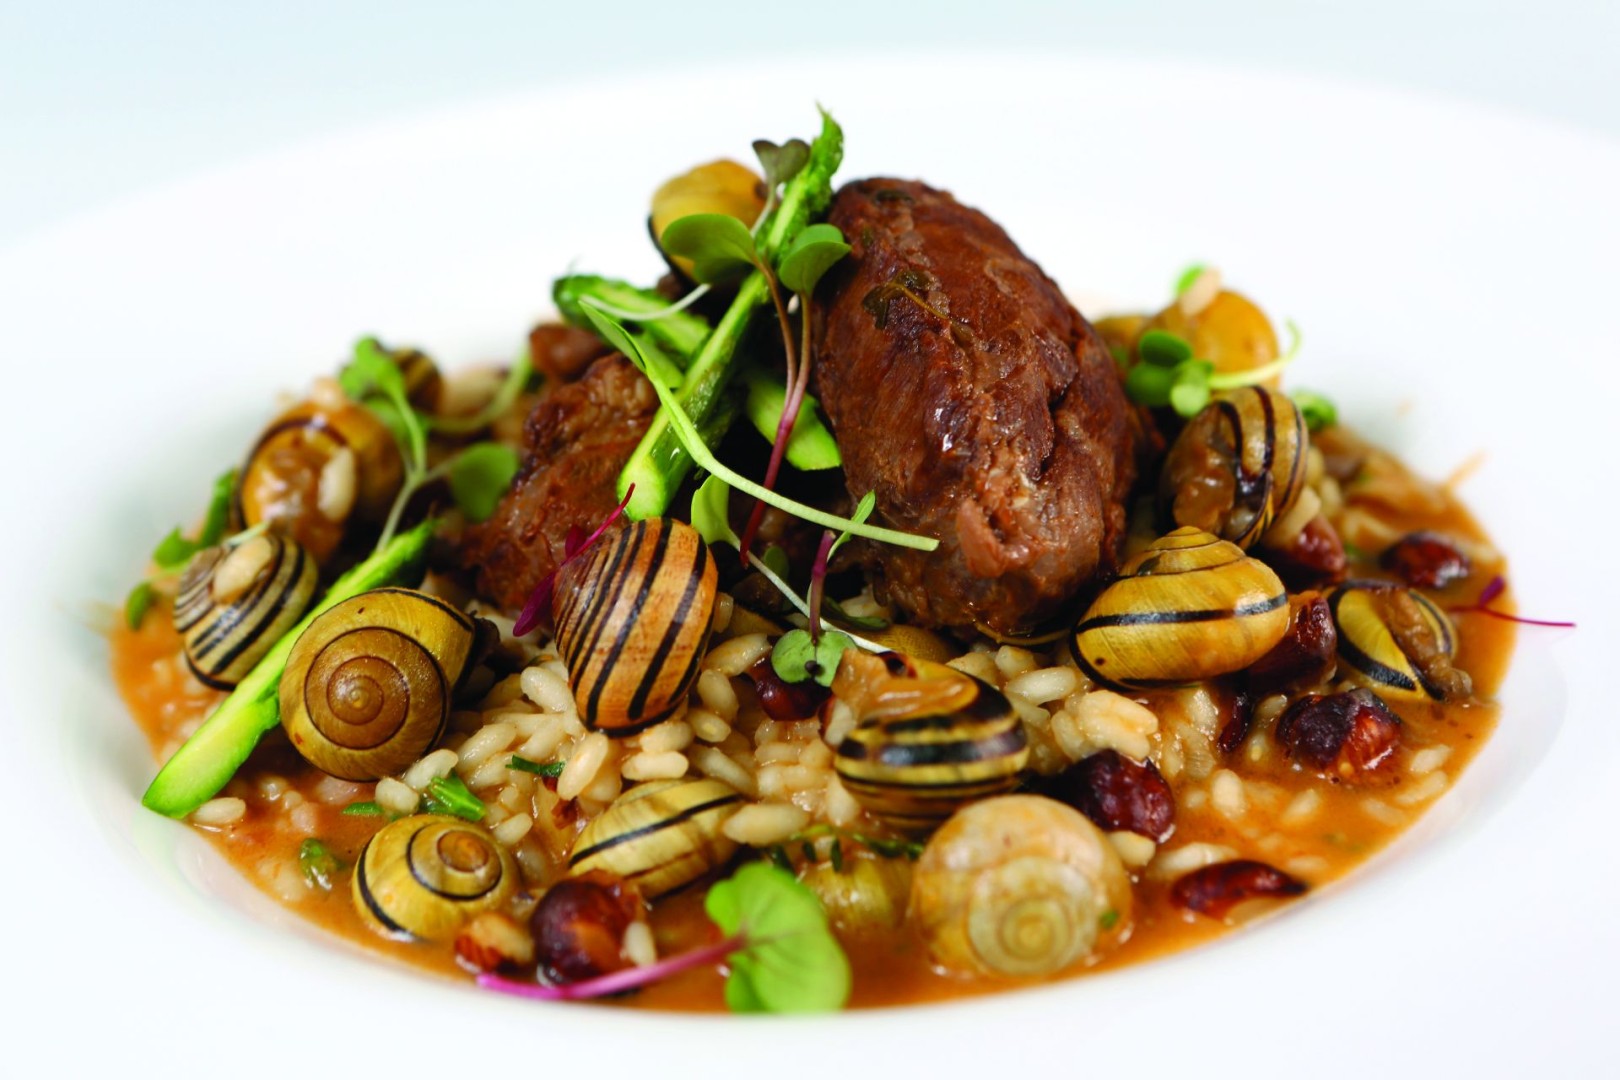 Iberian pork cheek braised with yellow snail, risotto, asparagus and hazelnut